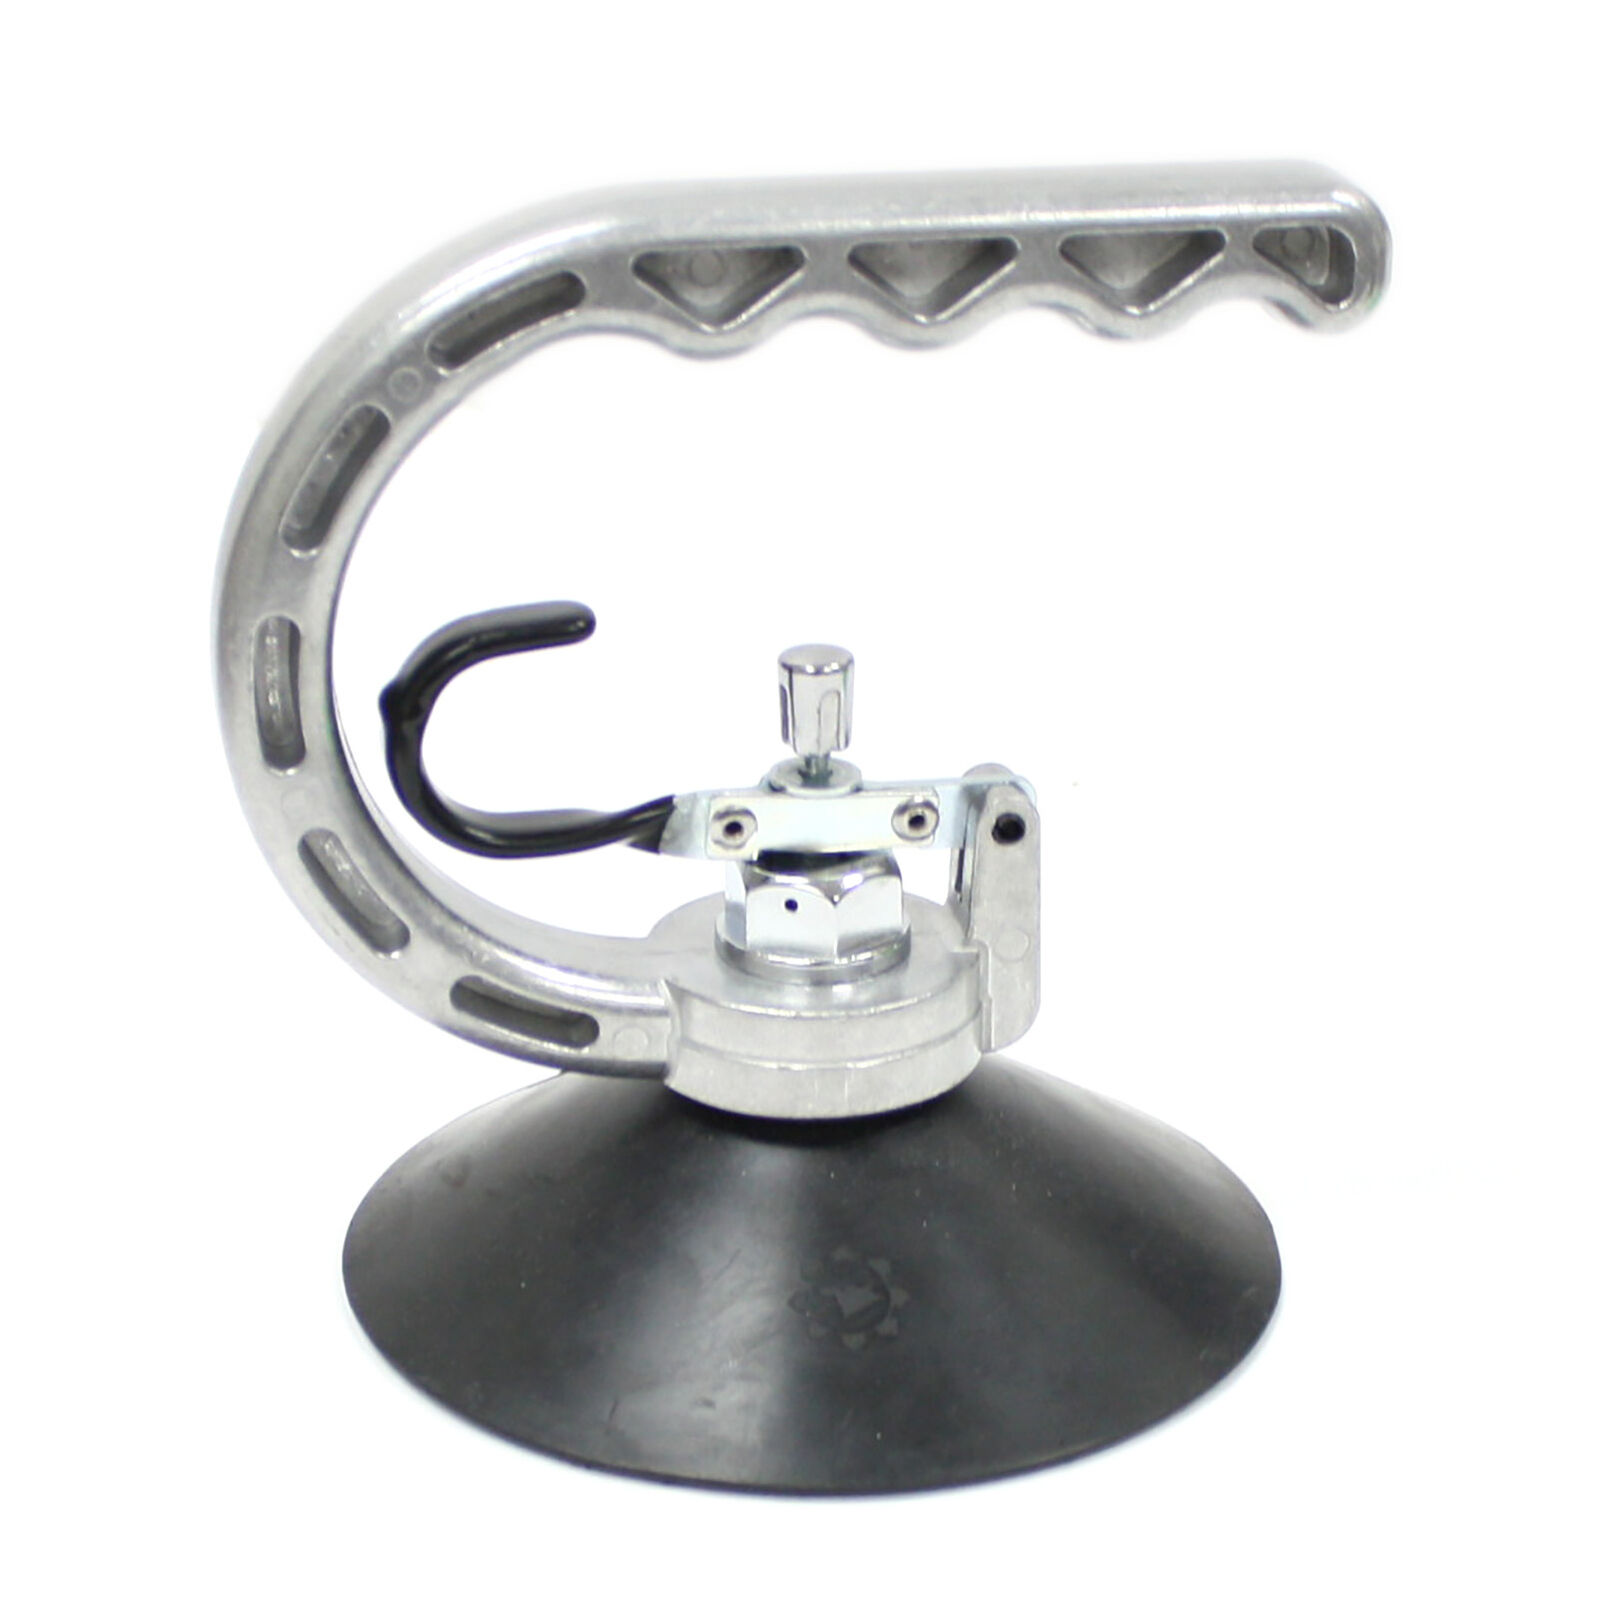 Suction Cup Dent Puller, Auto Body Suction Cup